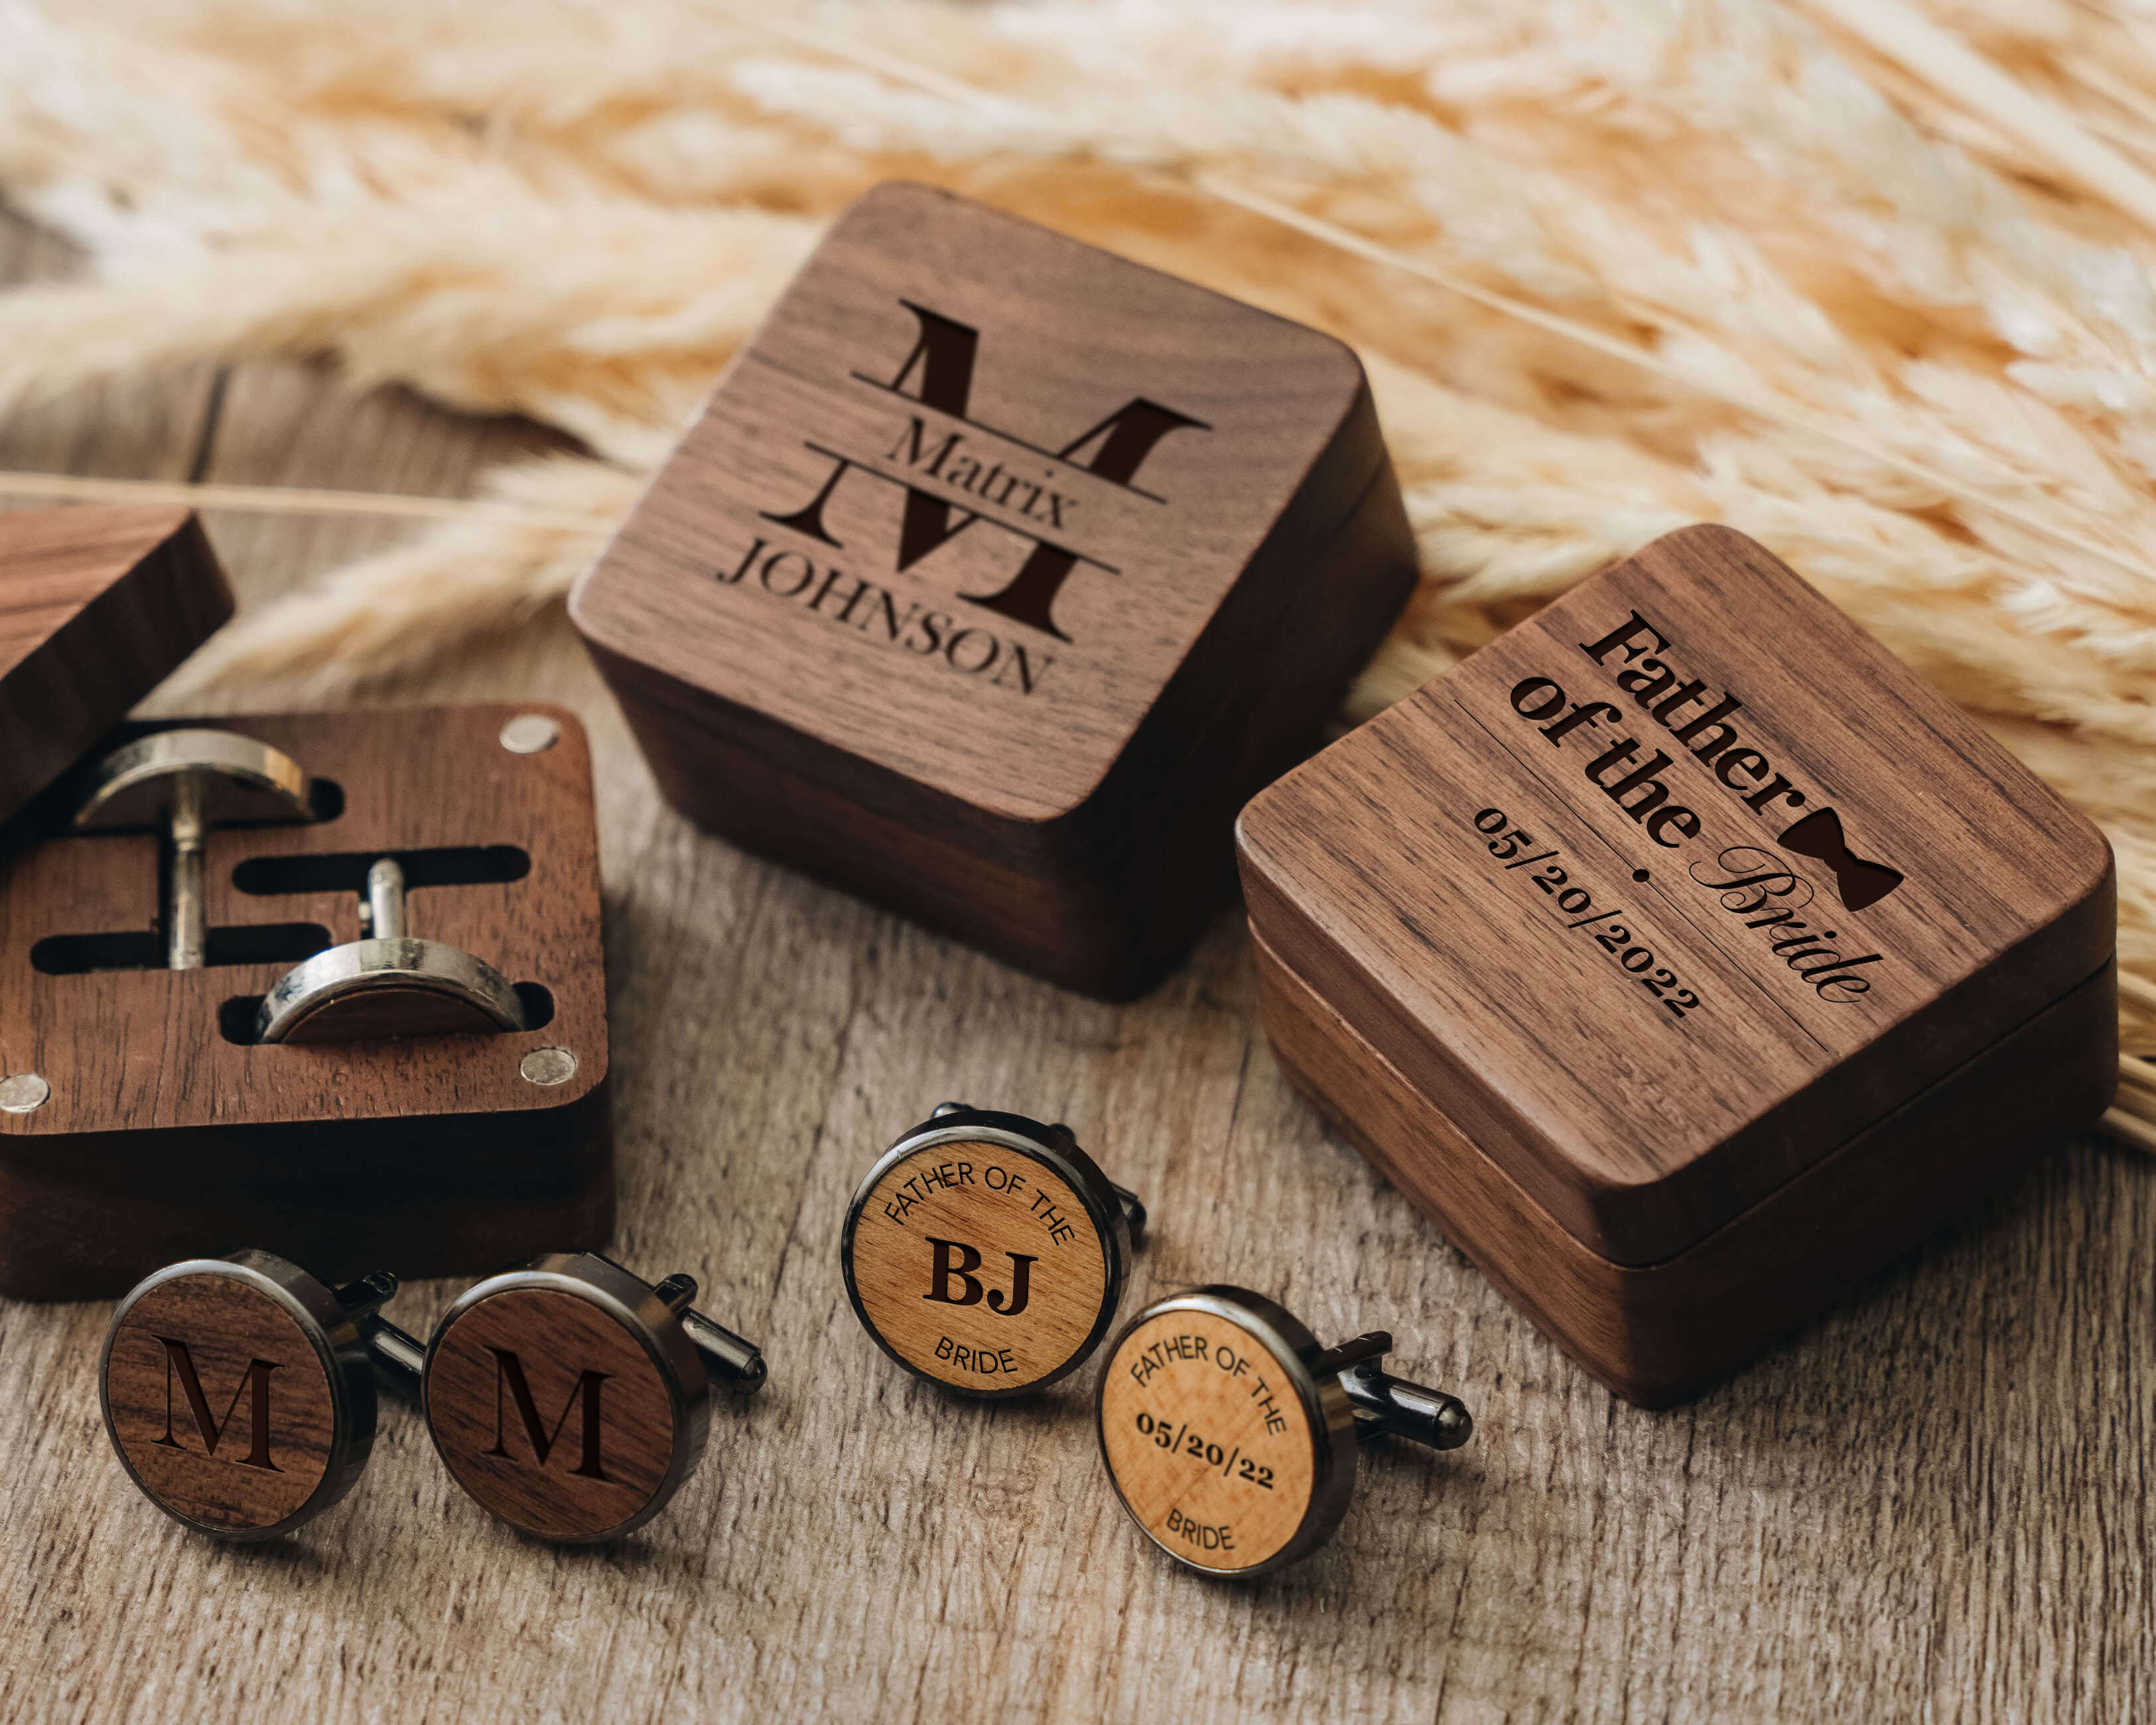 3 design of Personalized Wooden Cufflinks with initials and name, perfect for Groomsmen Gifts.